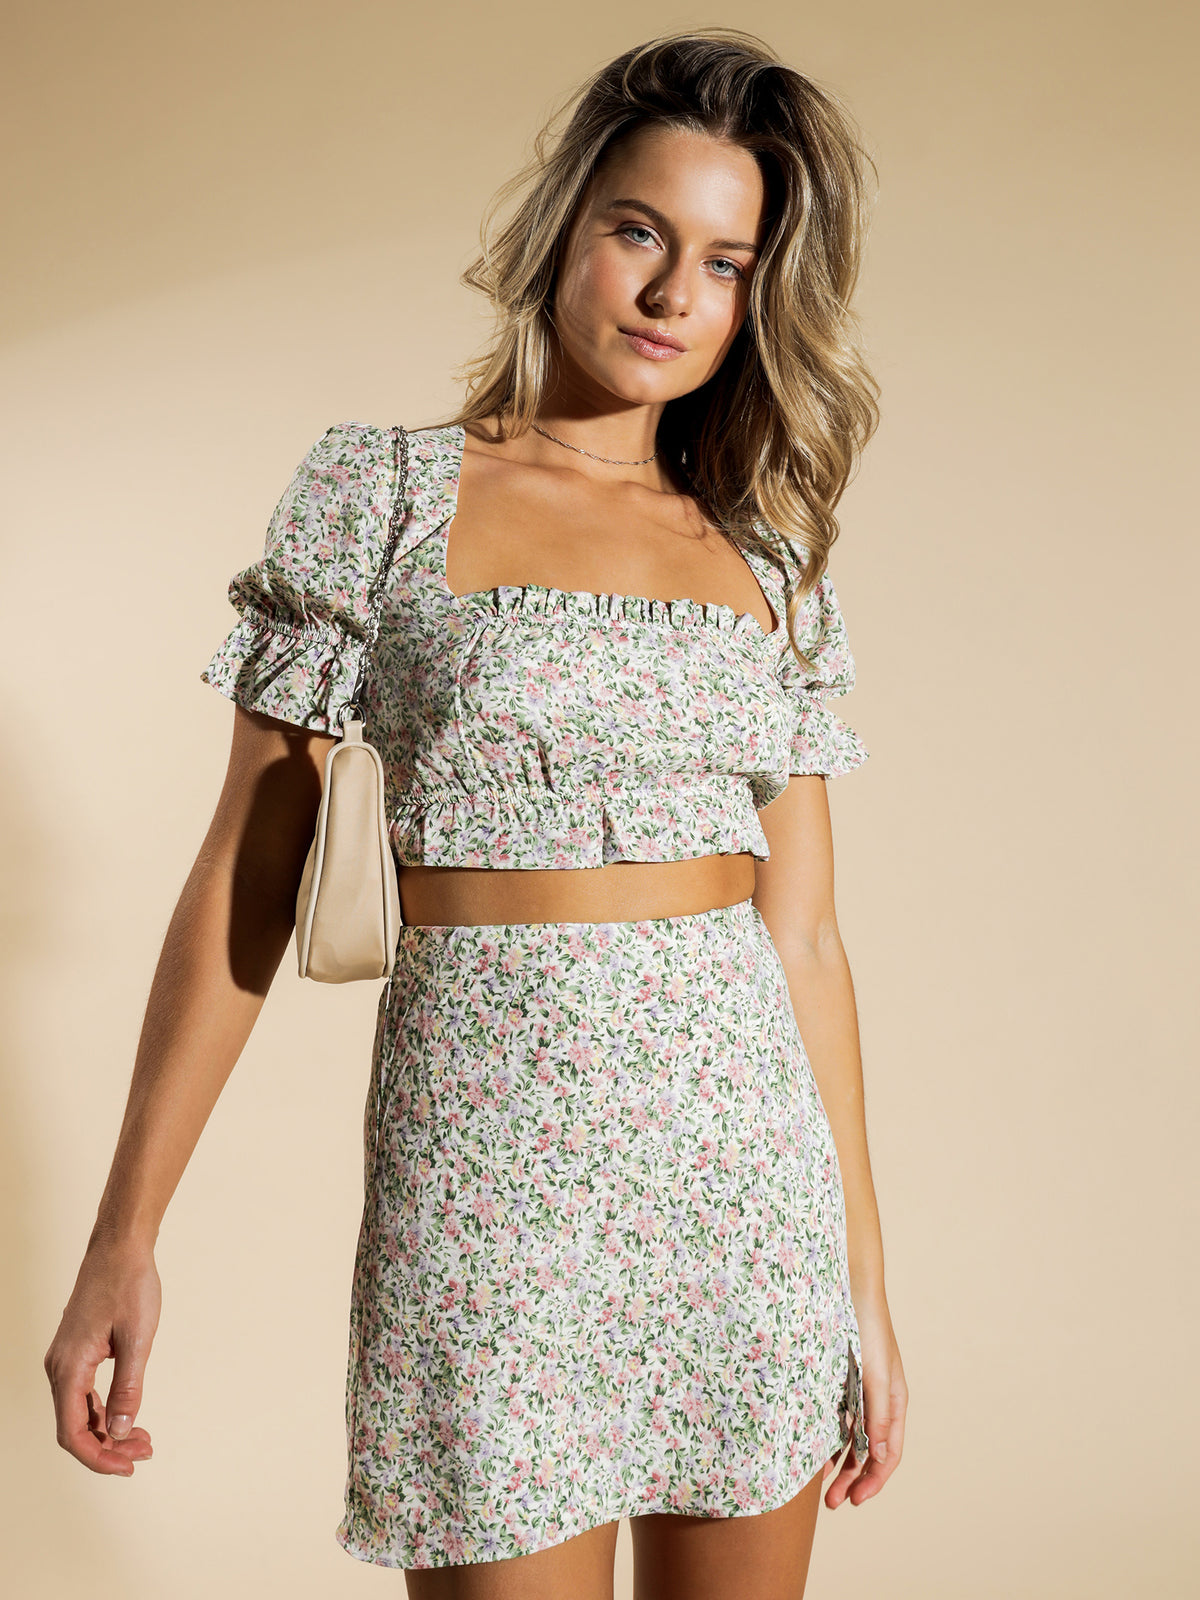 Eve Mini Skirt in Spring Floral